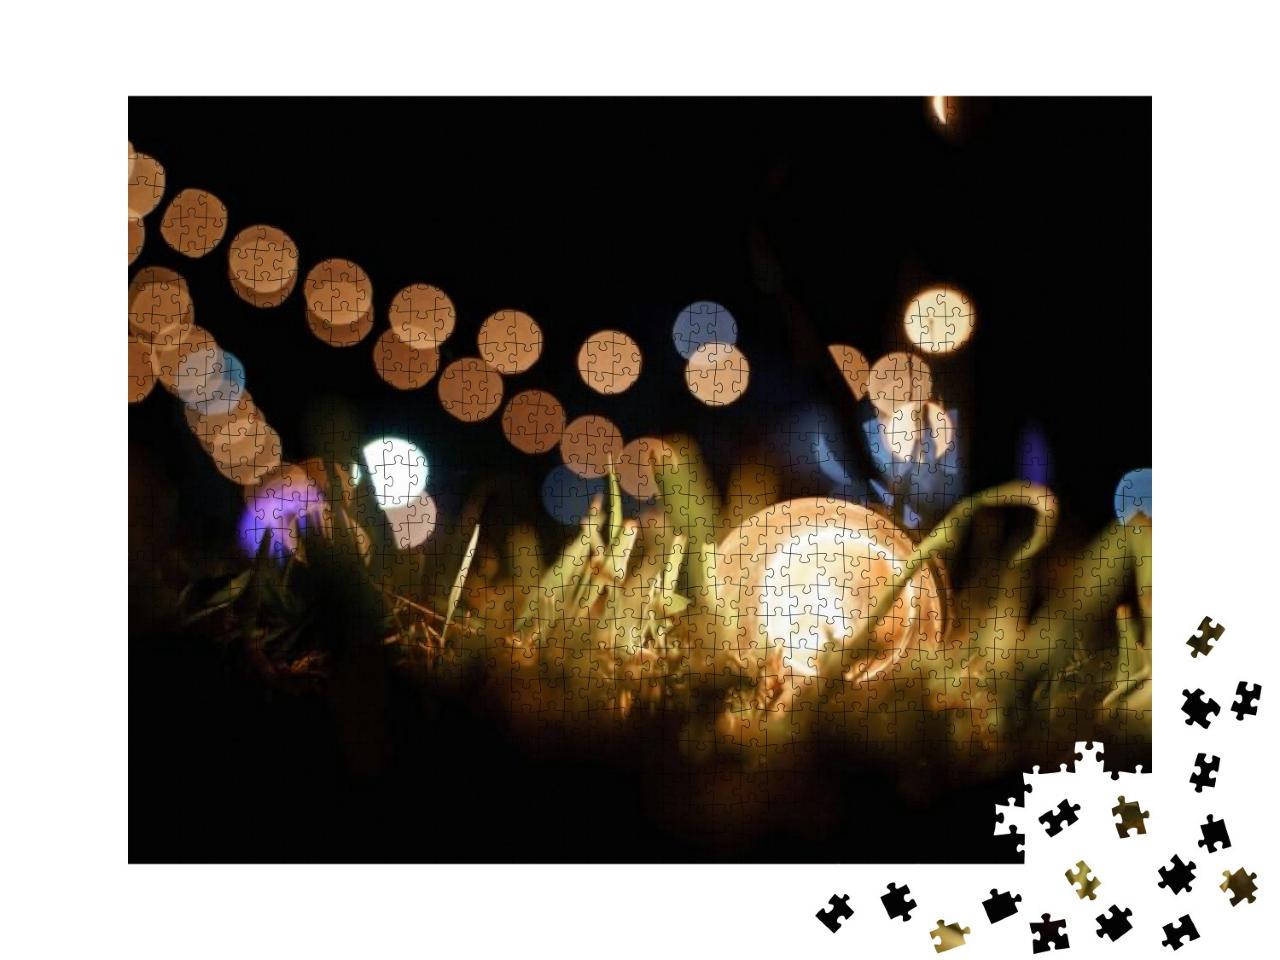 Warm Globe String Light Bulb on the Glass At Night Outdoo... Jigsaw Puzzle with 1000 pieces